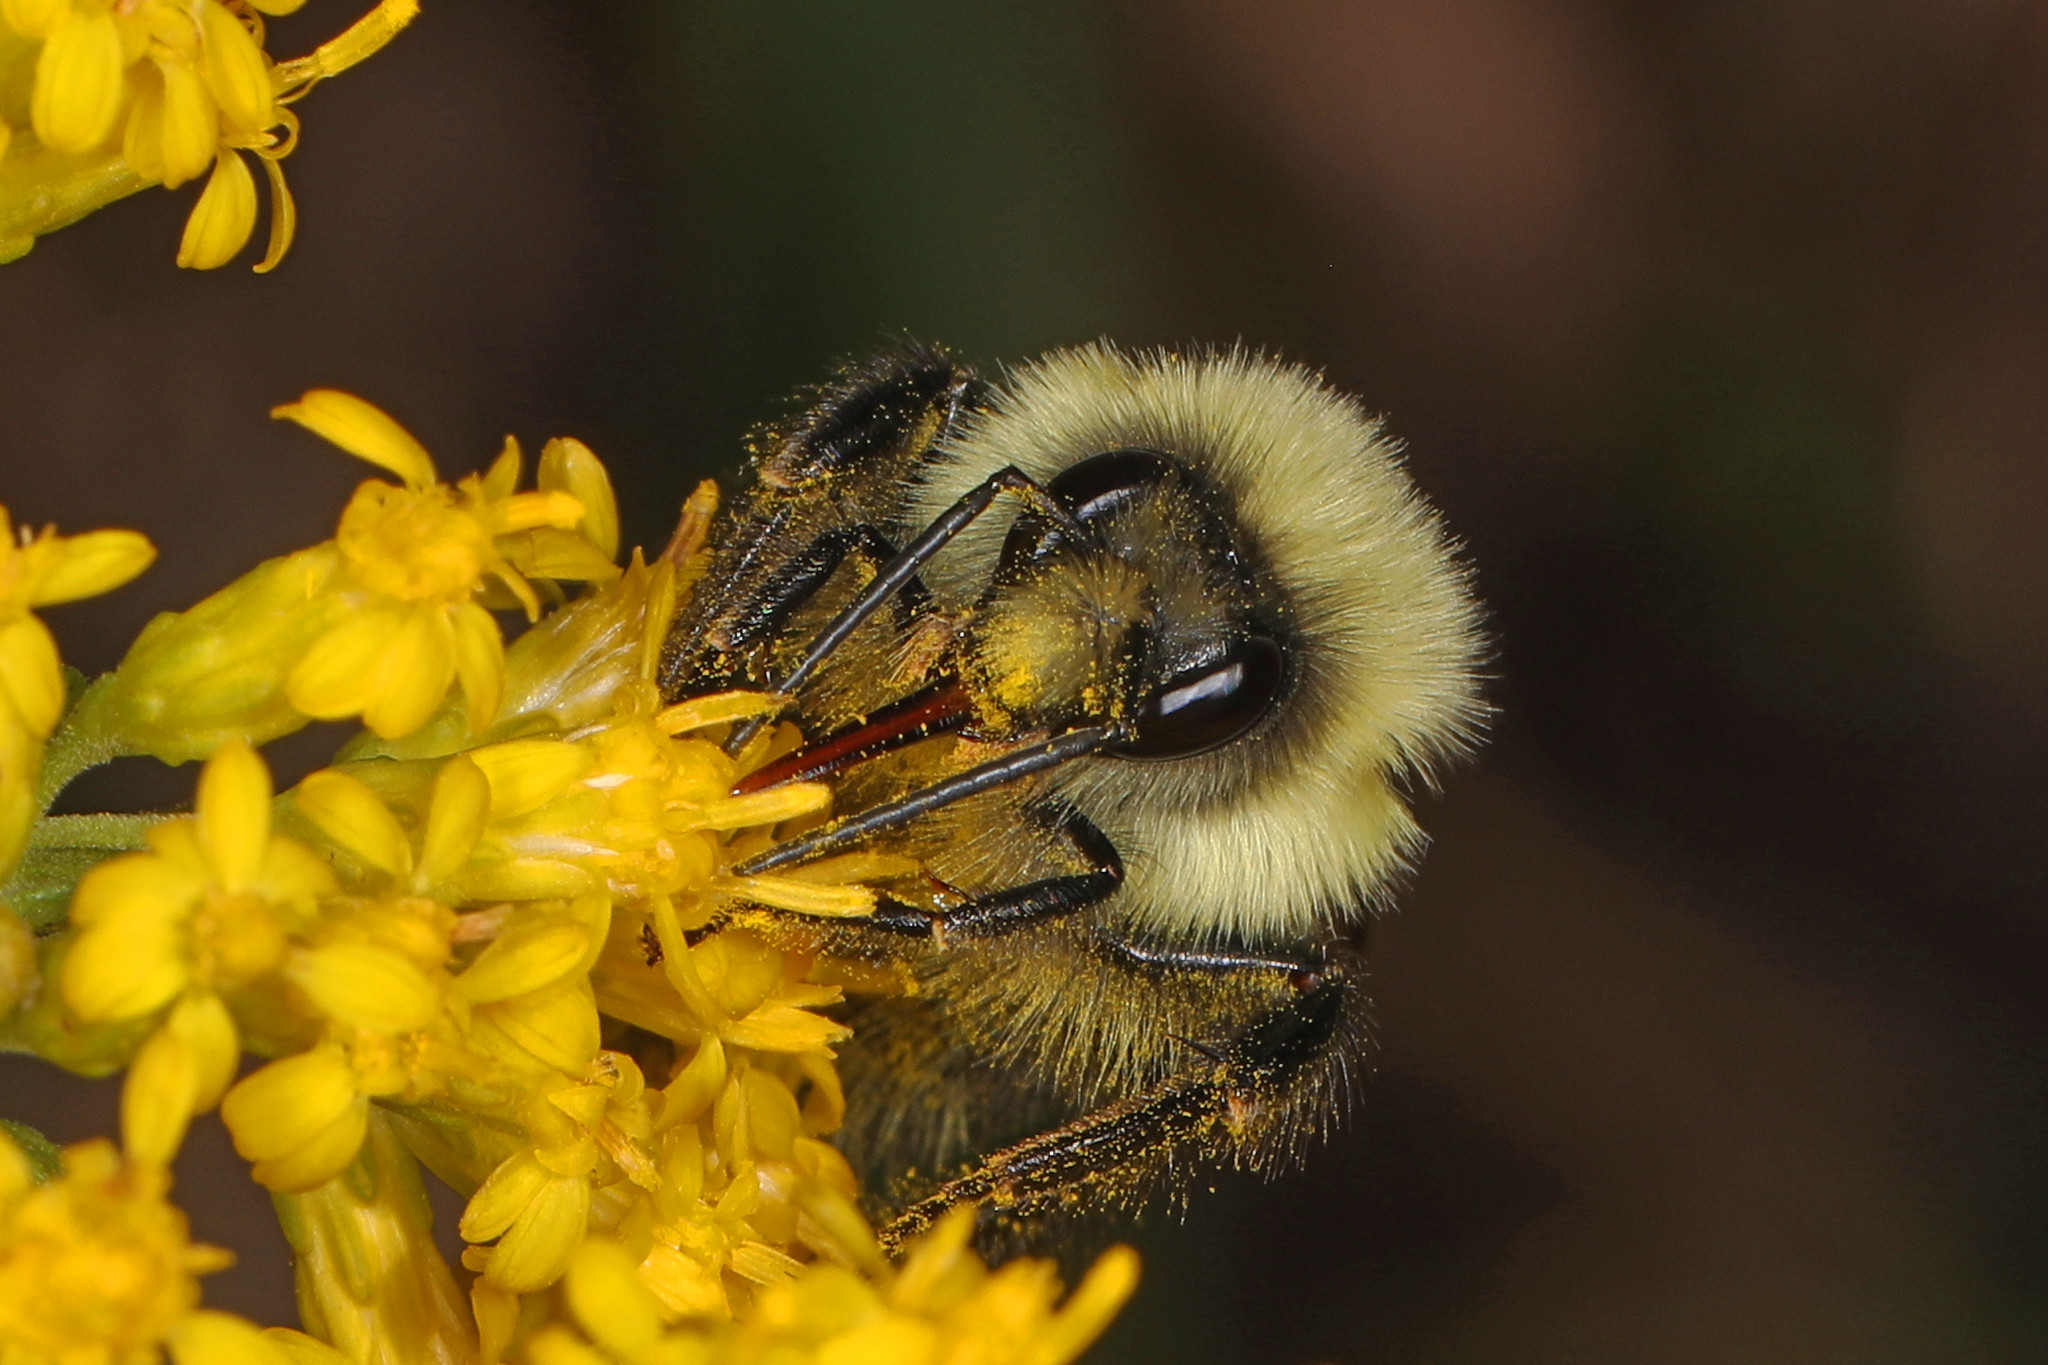 Common Eastern Bumblebee collecting nectar on a yellow flowers.